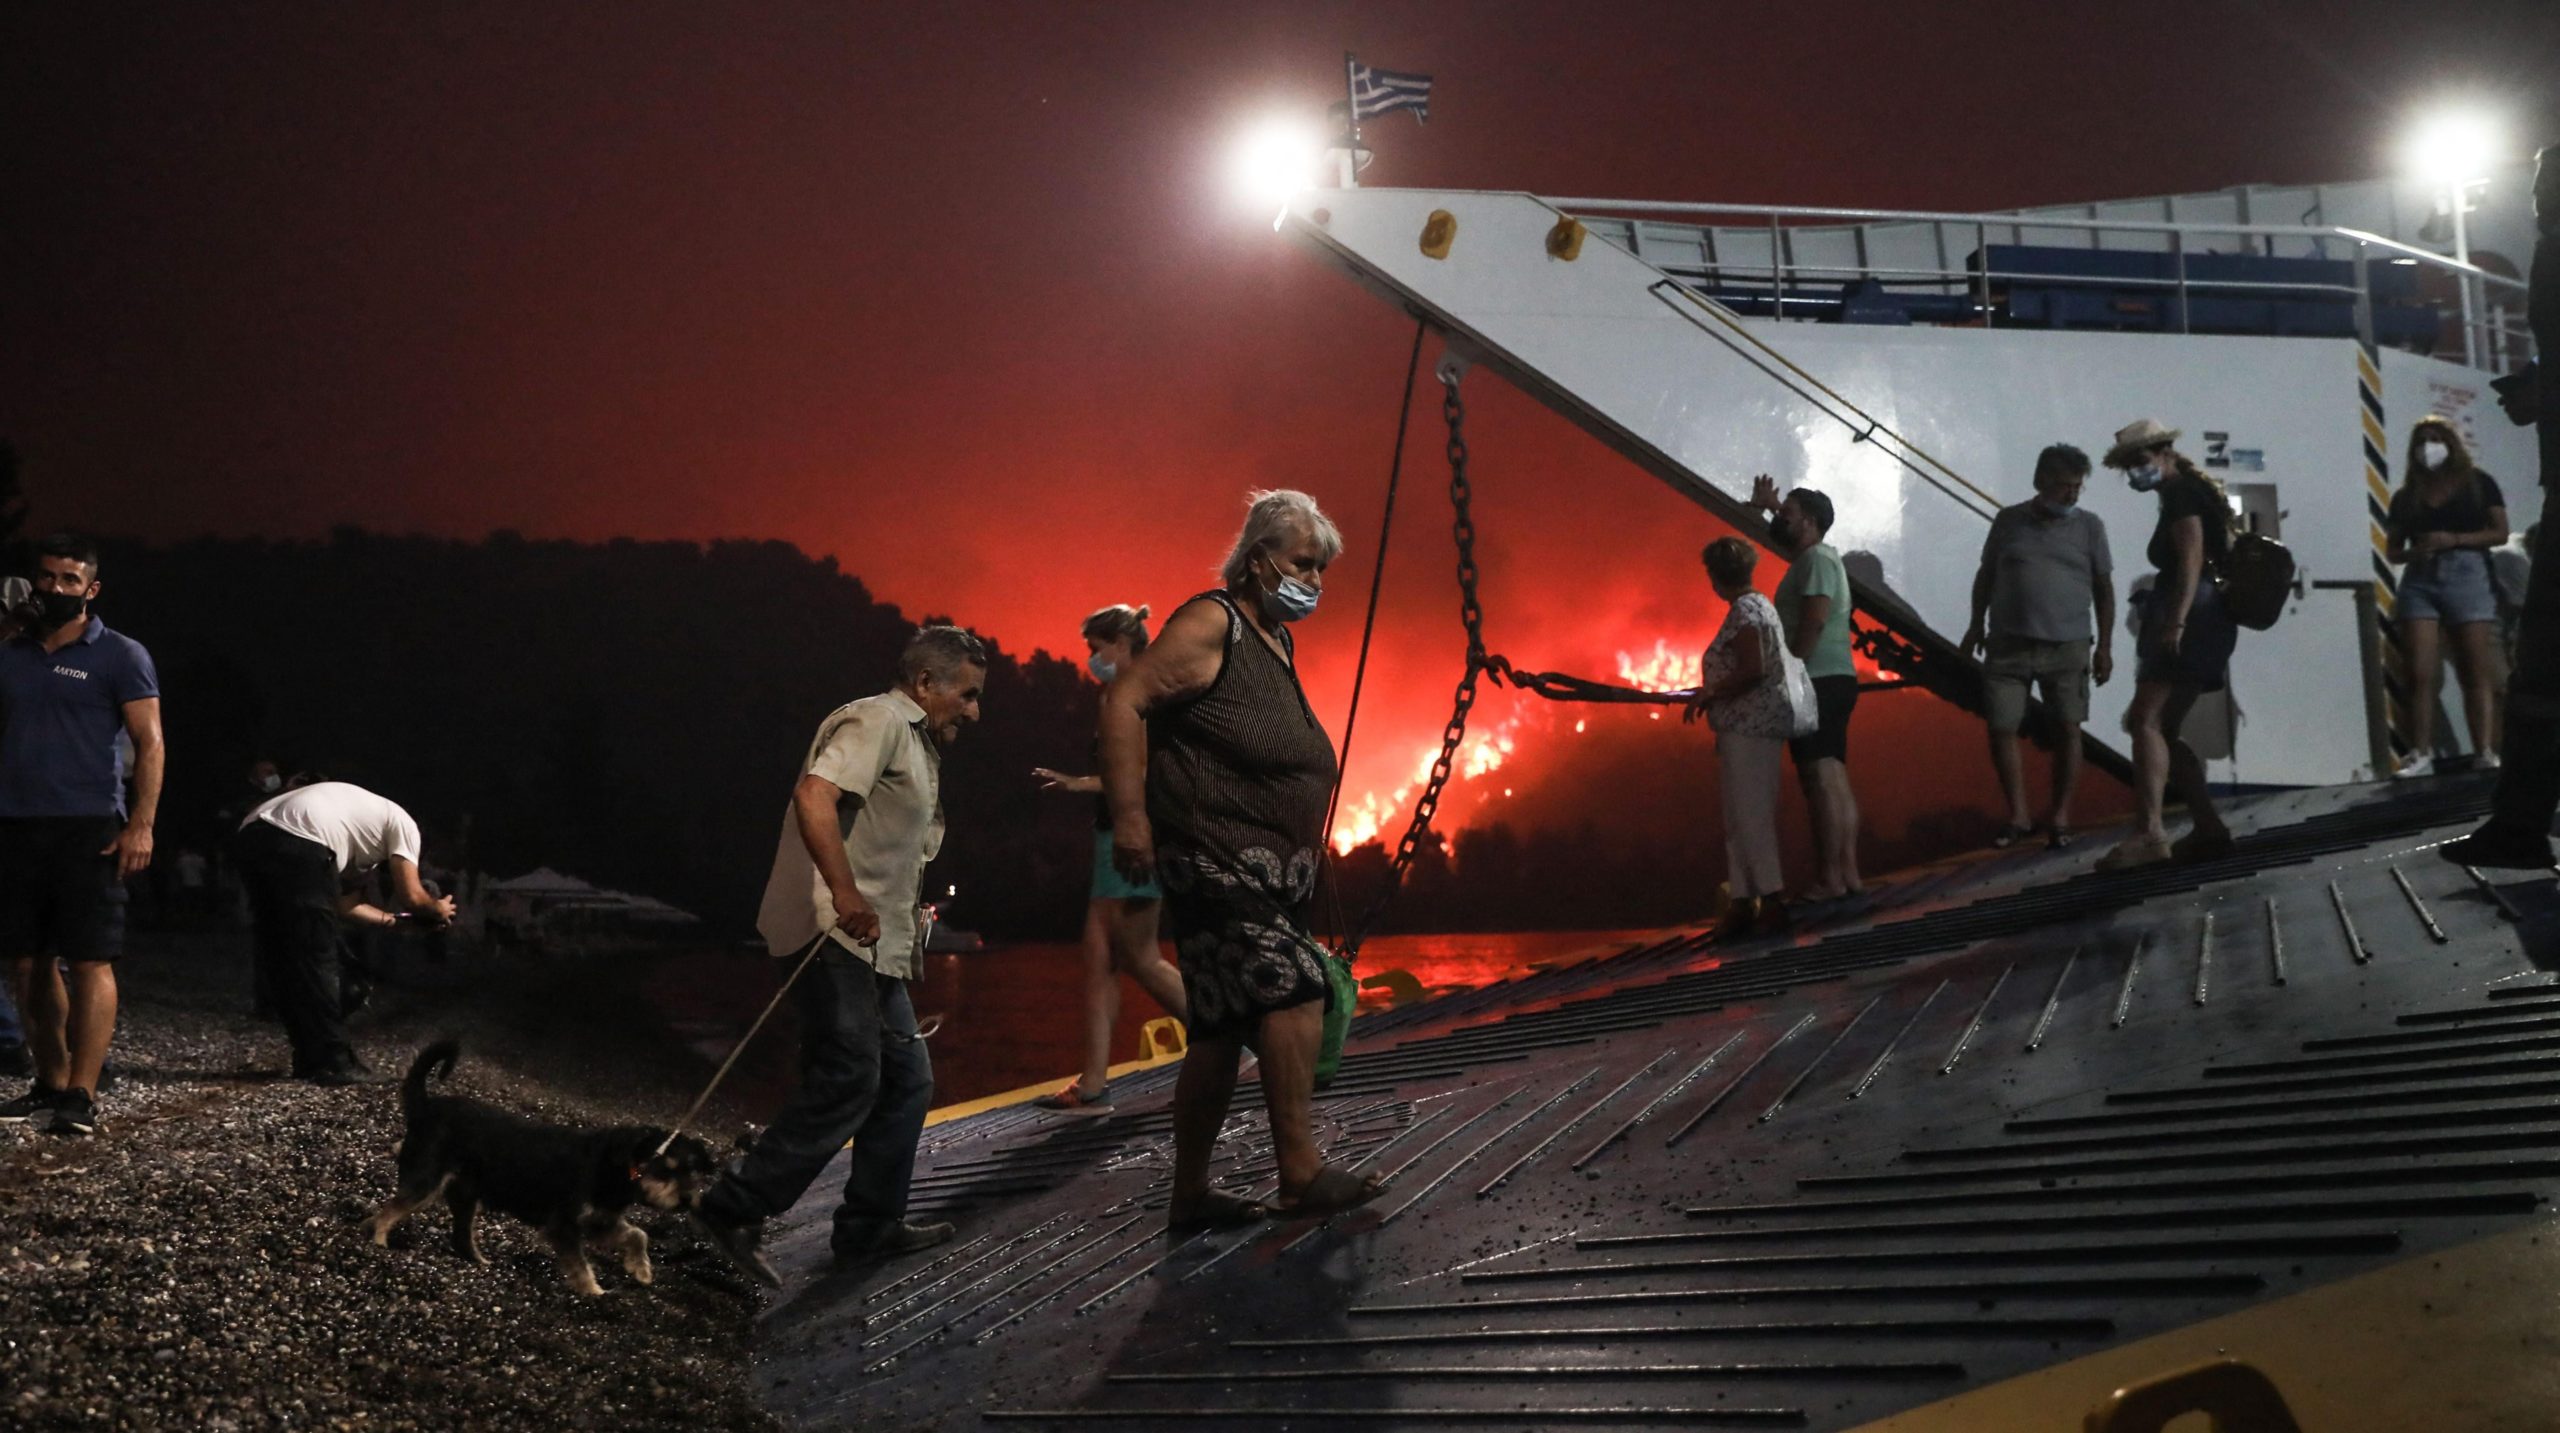 People board a ferry prior to an evacuation as a wildfire approaches the seaside village of Limni on the island of Evia, Greece, on August 6, 2021. (Photo: Sotiris Dimitropoulos, Getty Images)